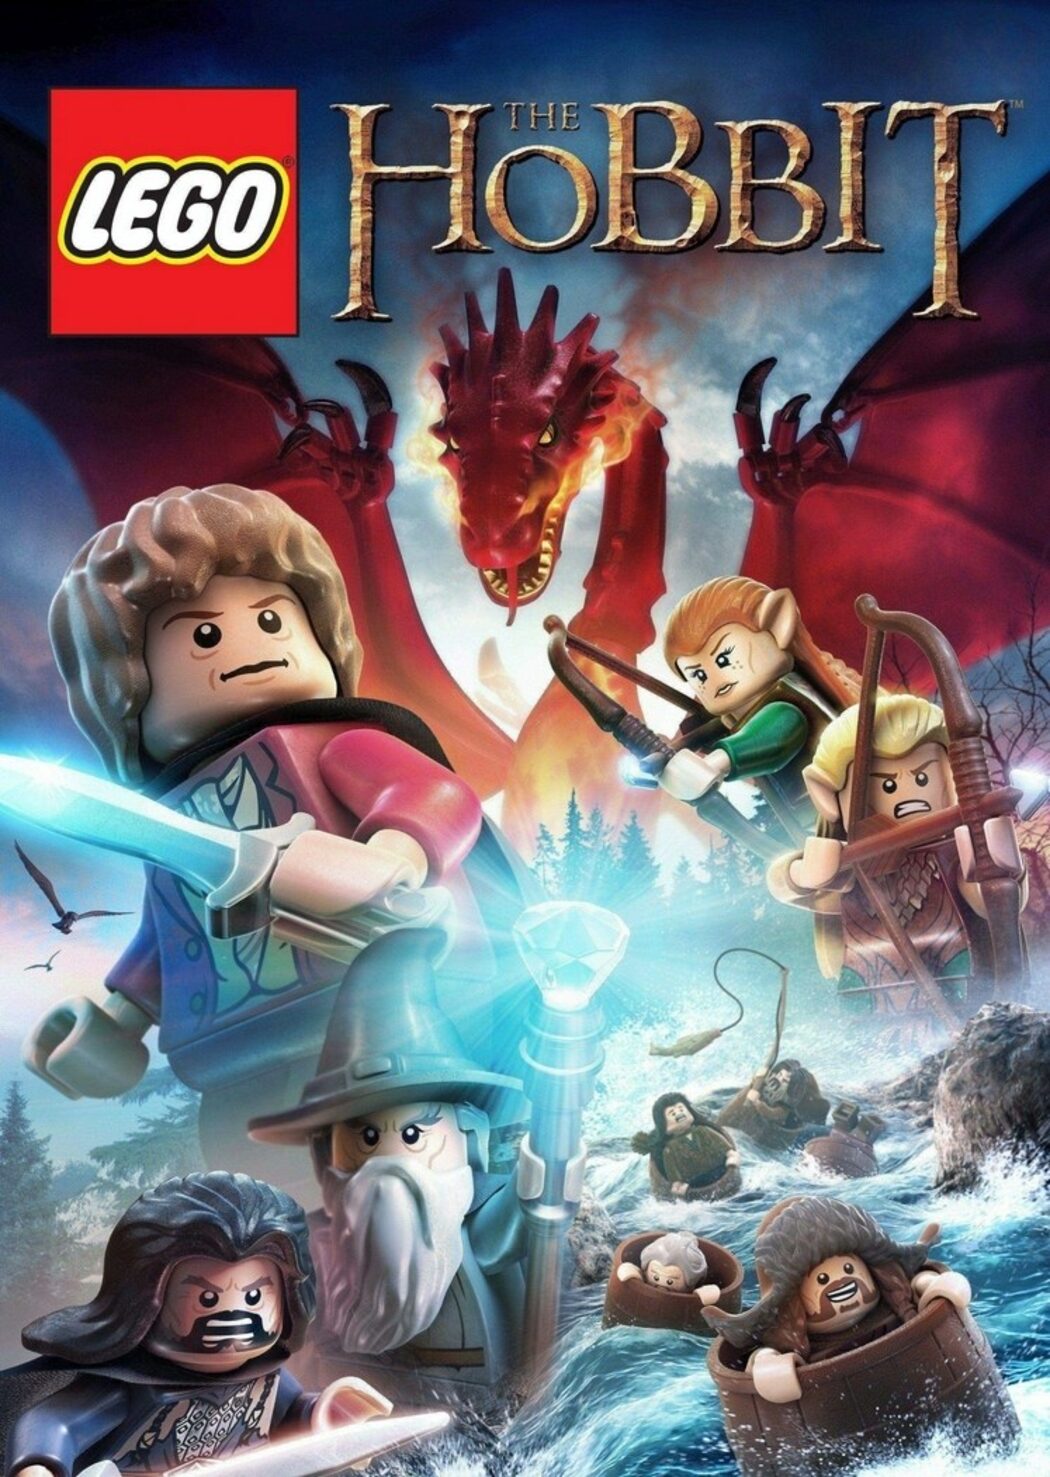 lego hobbit battle of the five armies video game